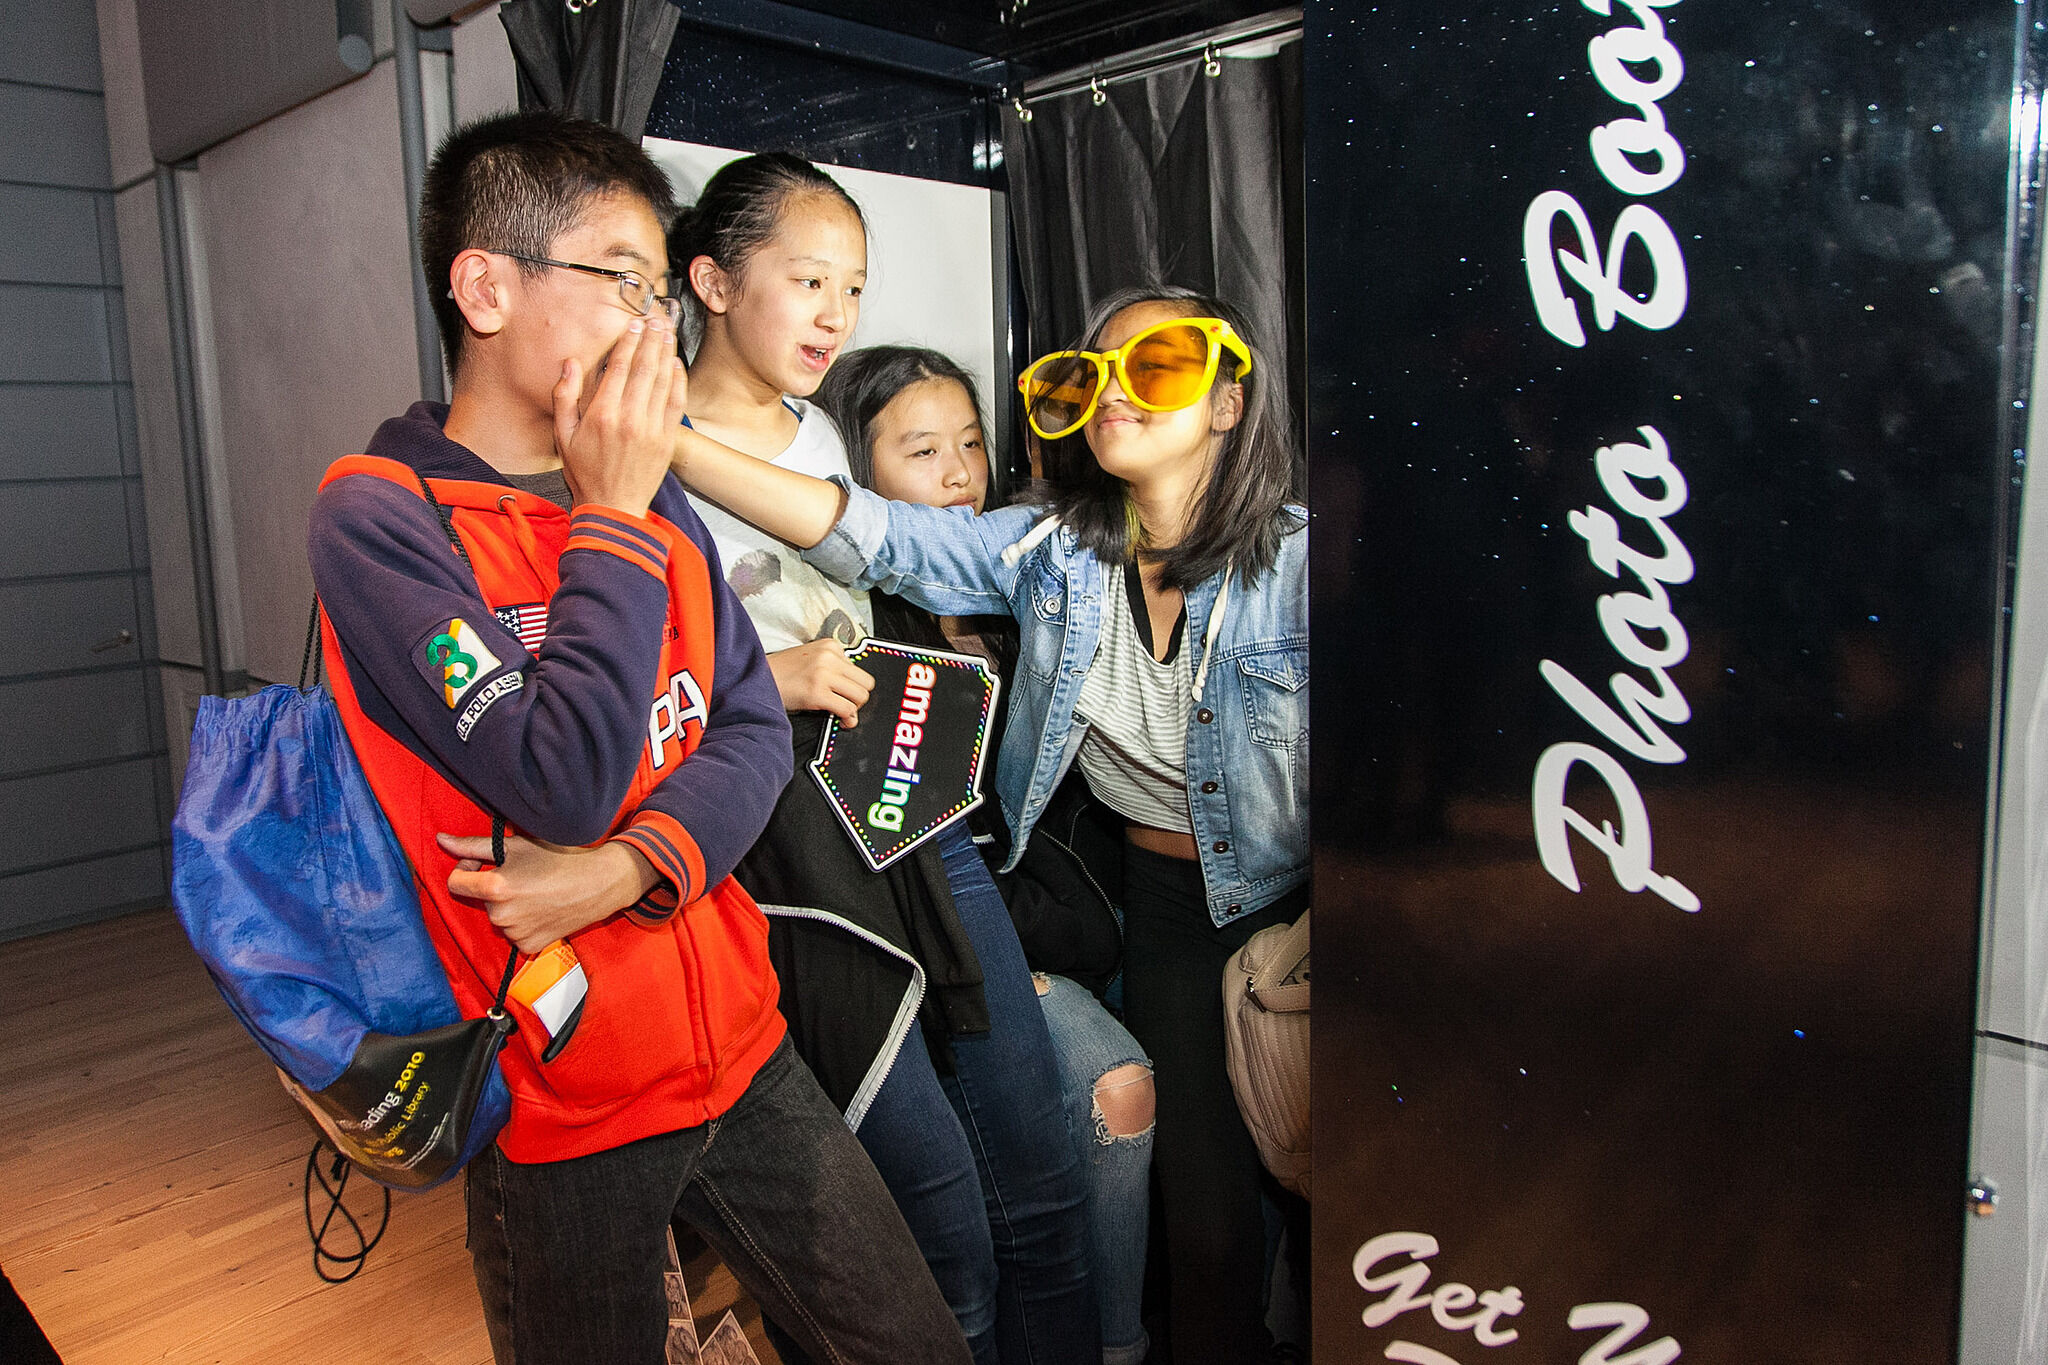 Students have a fun time in a photo booth